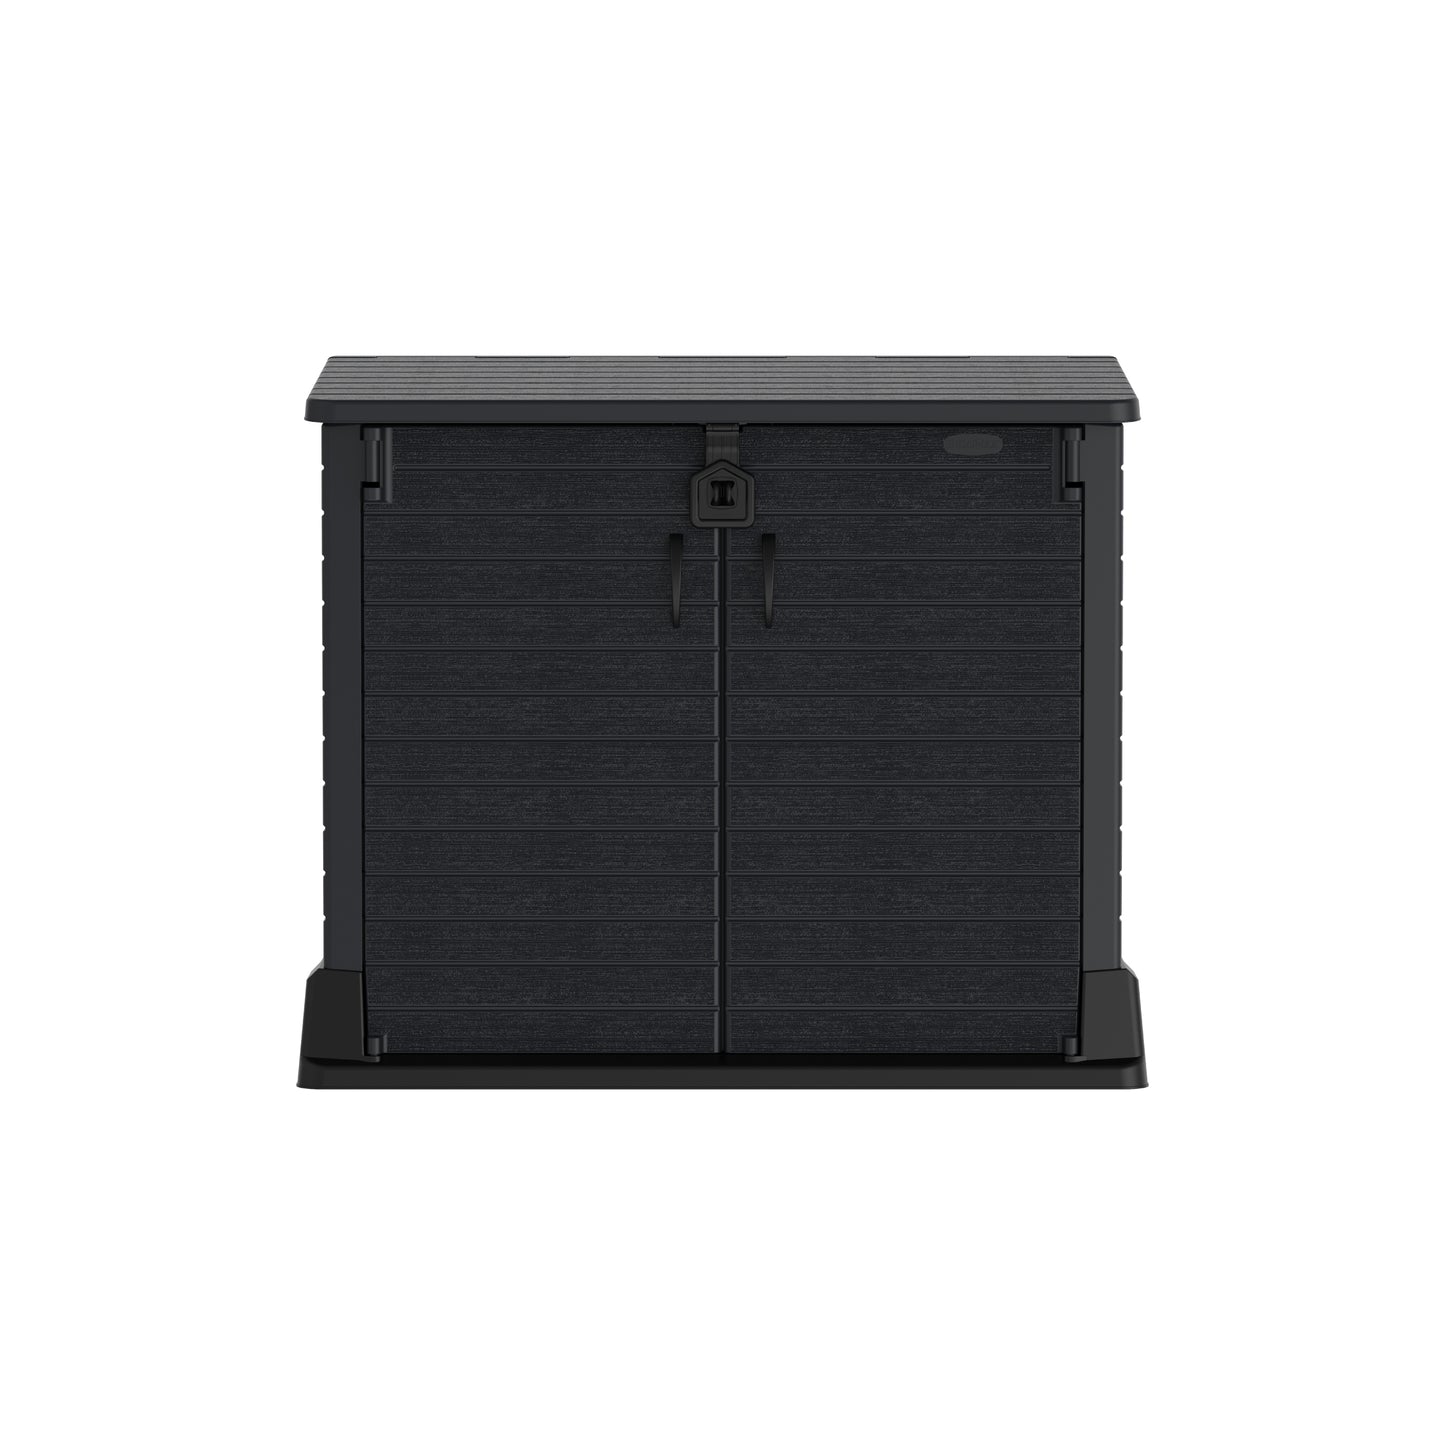 Dark grey, 850 L plastic garden storage shed, for outdoor tools, BBQ's and garbage bins.